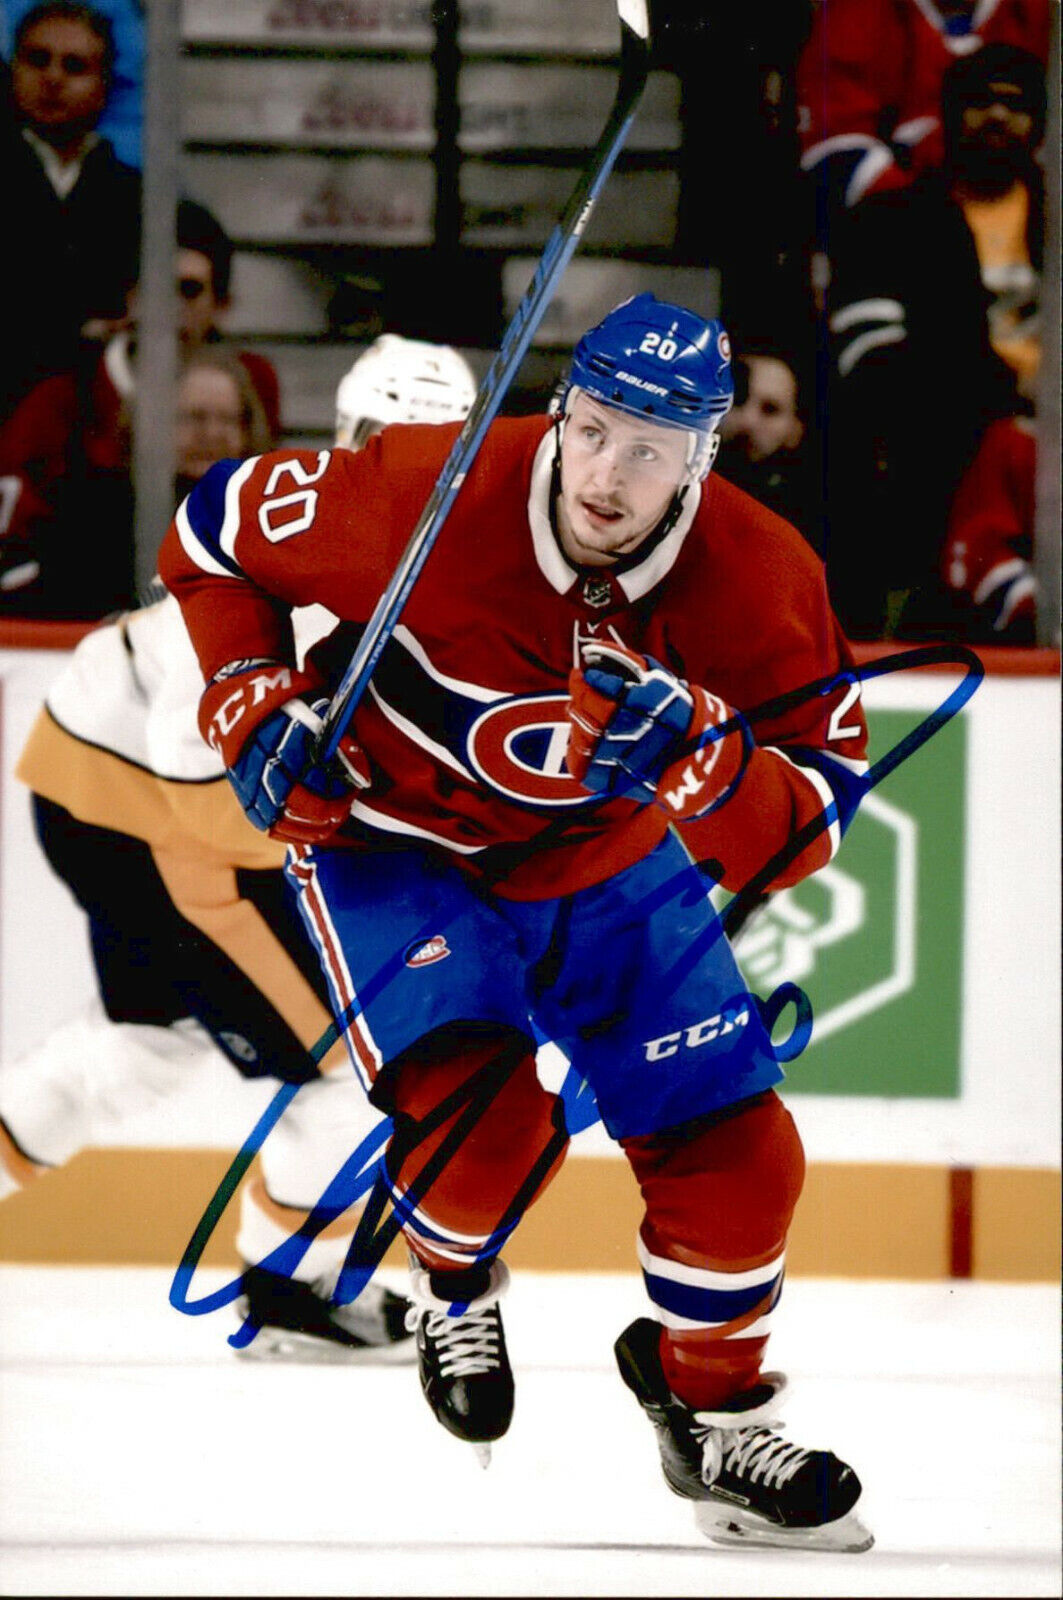 Nicolas Deslauriers SIGNED 4x6 Photo Poster painting MONTREAL CANADIENS #6